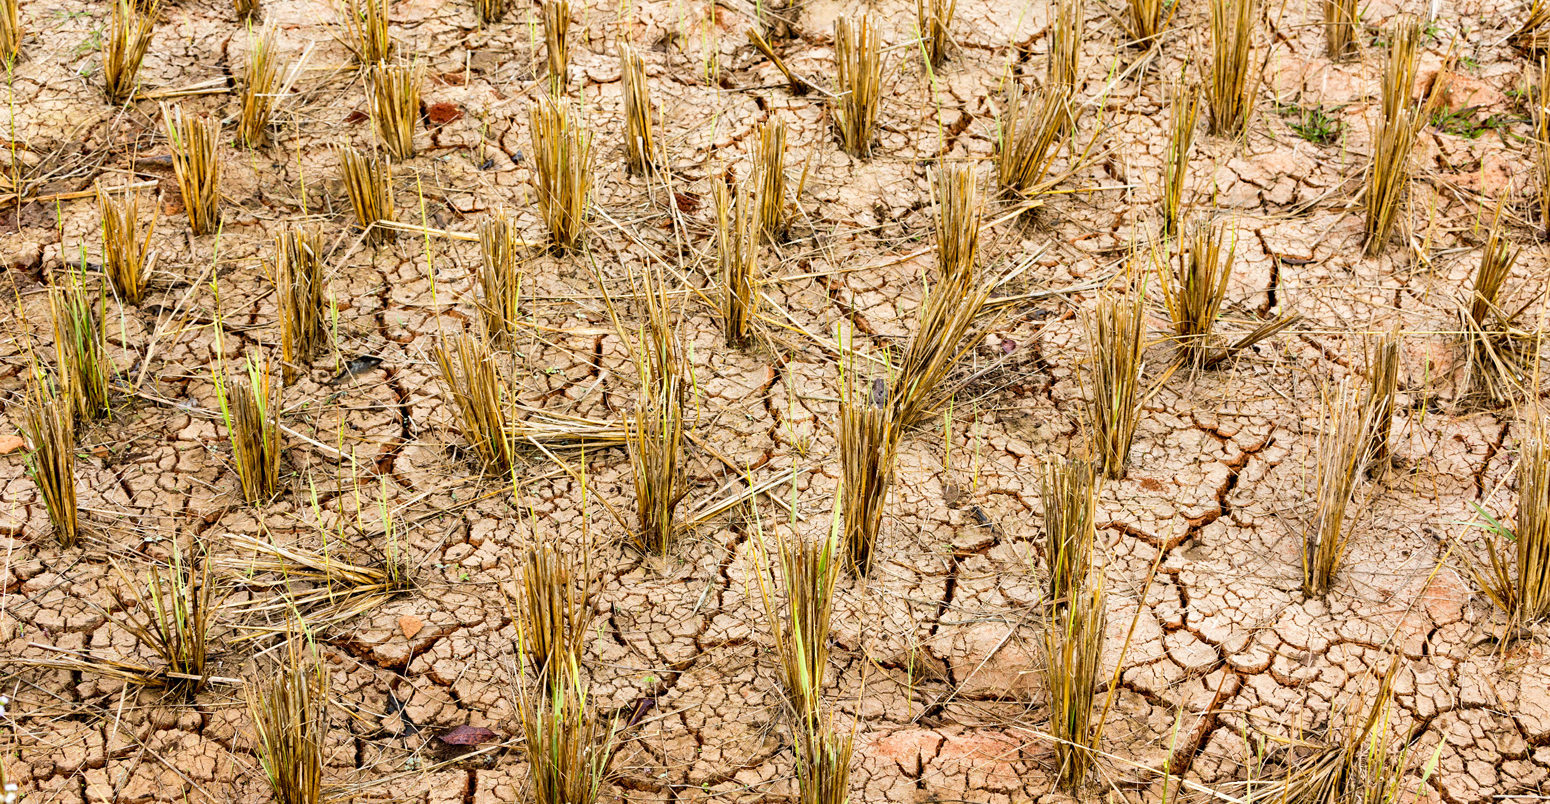 Dry and cracked rice field after harvest in winter, Thailand.